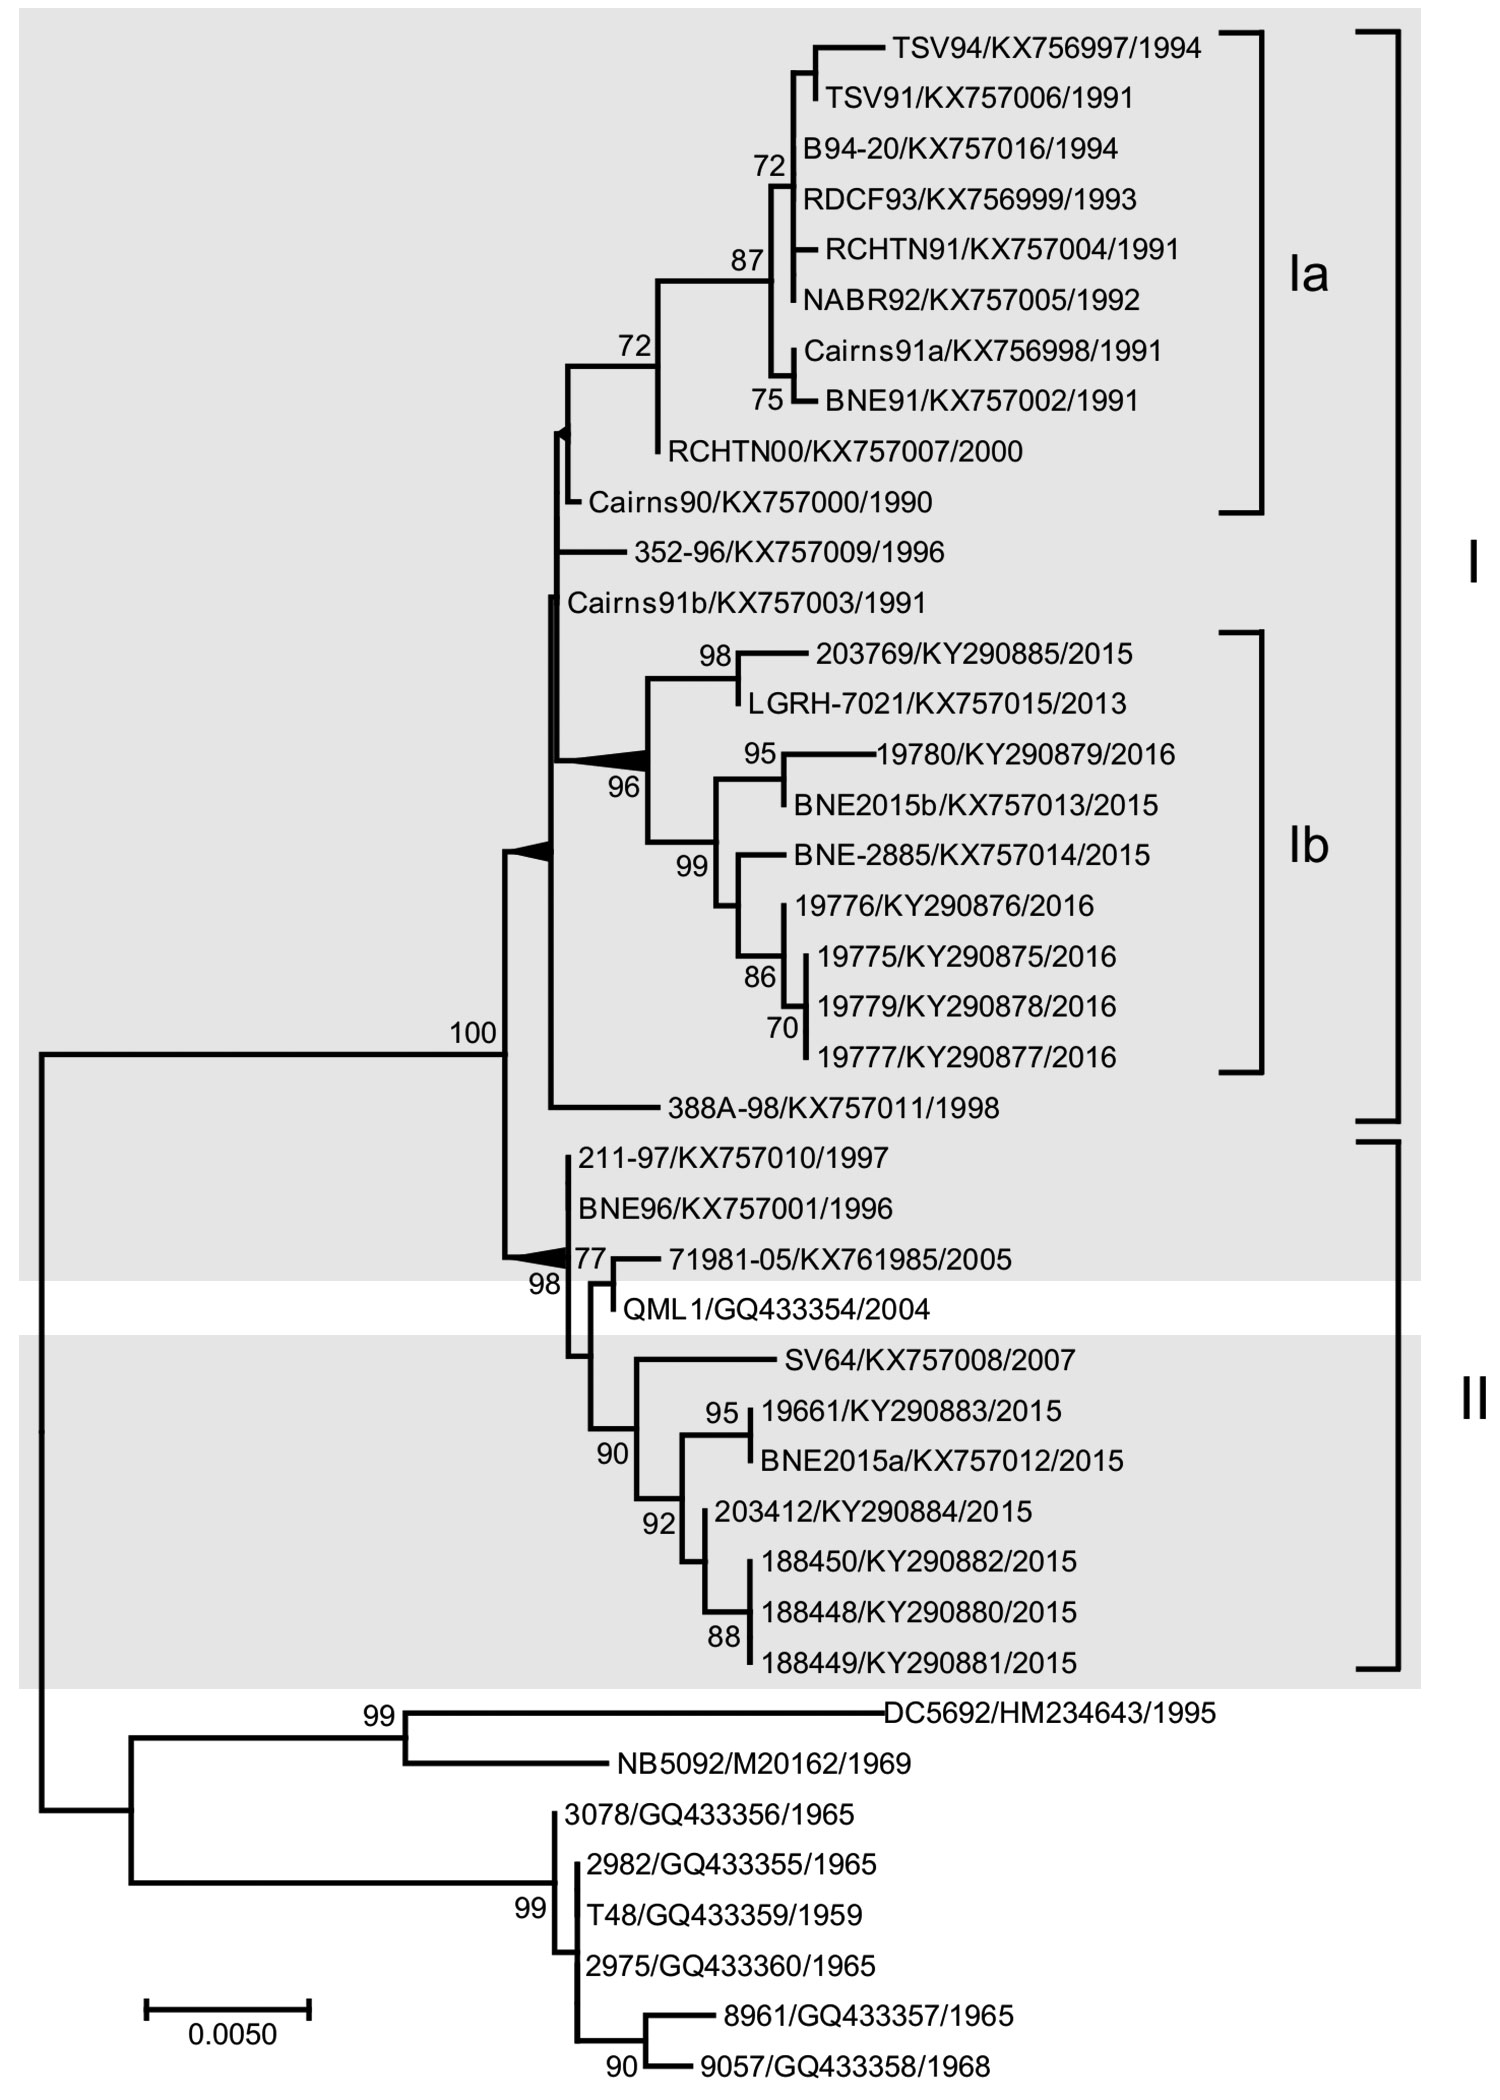 Maximum-likelihood phylogenetic tree of 41 complete Ross River virus envelope (E) 3 and E2 gene nucleotide sequences (1,458 nt), 32 from isolates collected in Queensland, Australia, during January 1, 1990–June 30, 2015 (gray shading), and 9 reference sequences. Tree was constructed by using MEGA 7.0 (https://megasoftware.net) with bootstrap support (1,000 replications). The tree is midpoint rooted for clarity. Circulating northeastern lineages I and II are shown together with sublineages Ia and 